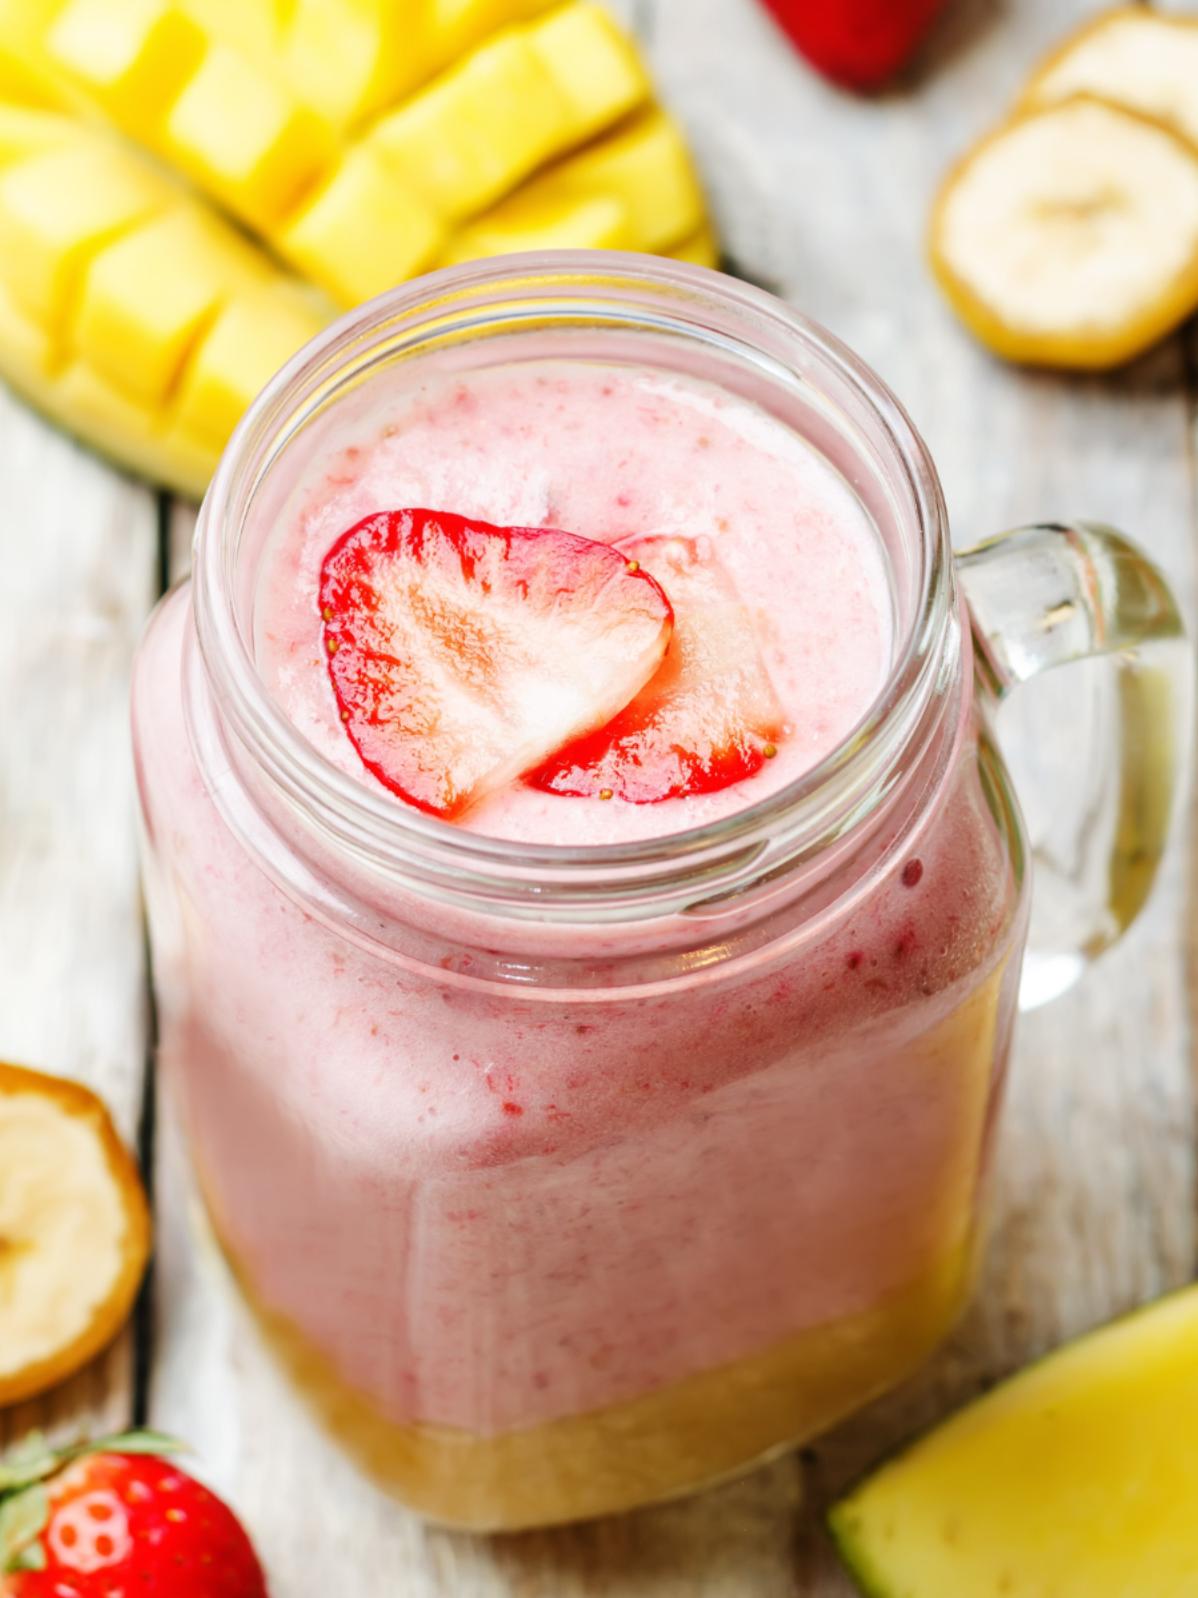 Delicious Dairy-Free Smoothie Recipe for a Healthy Lifestyle